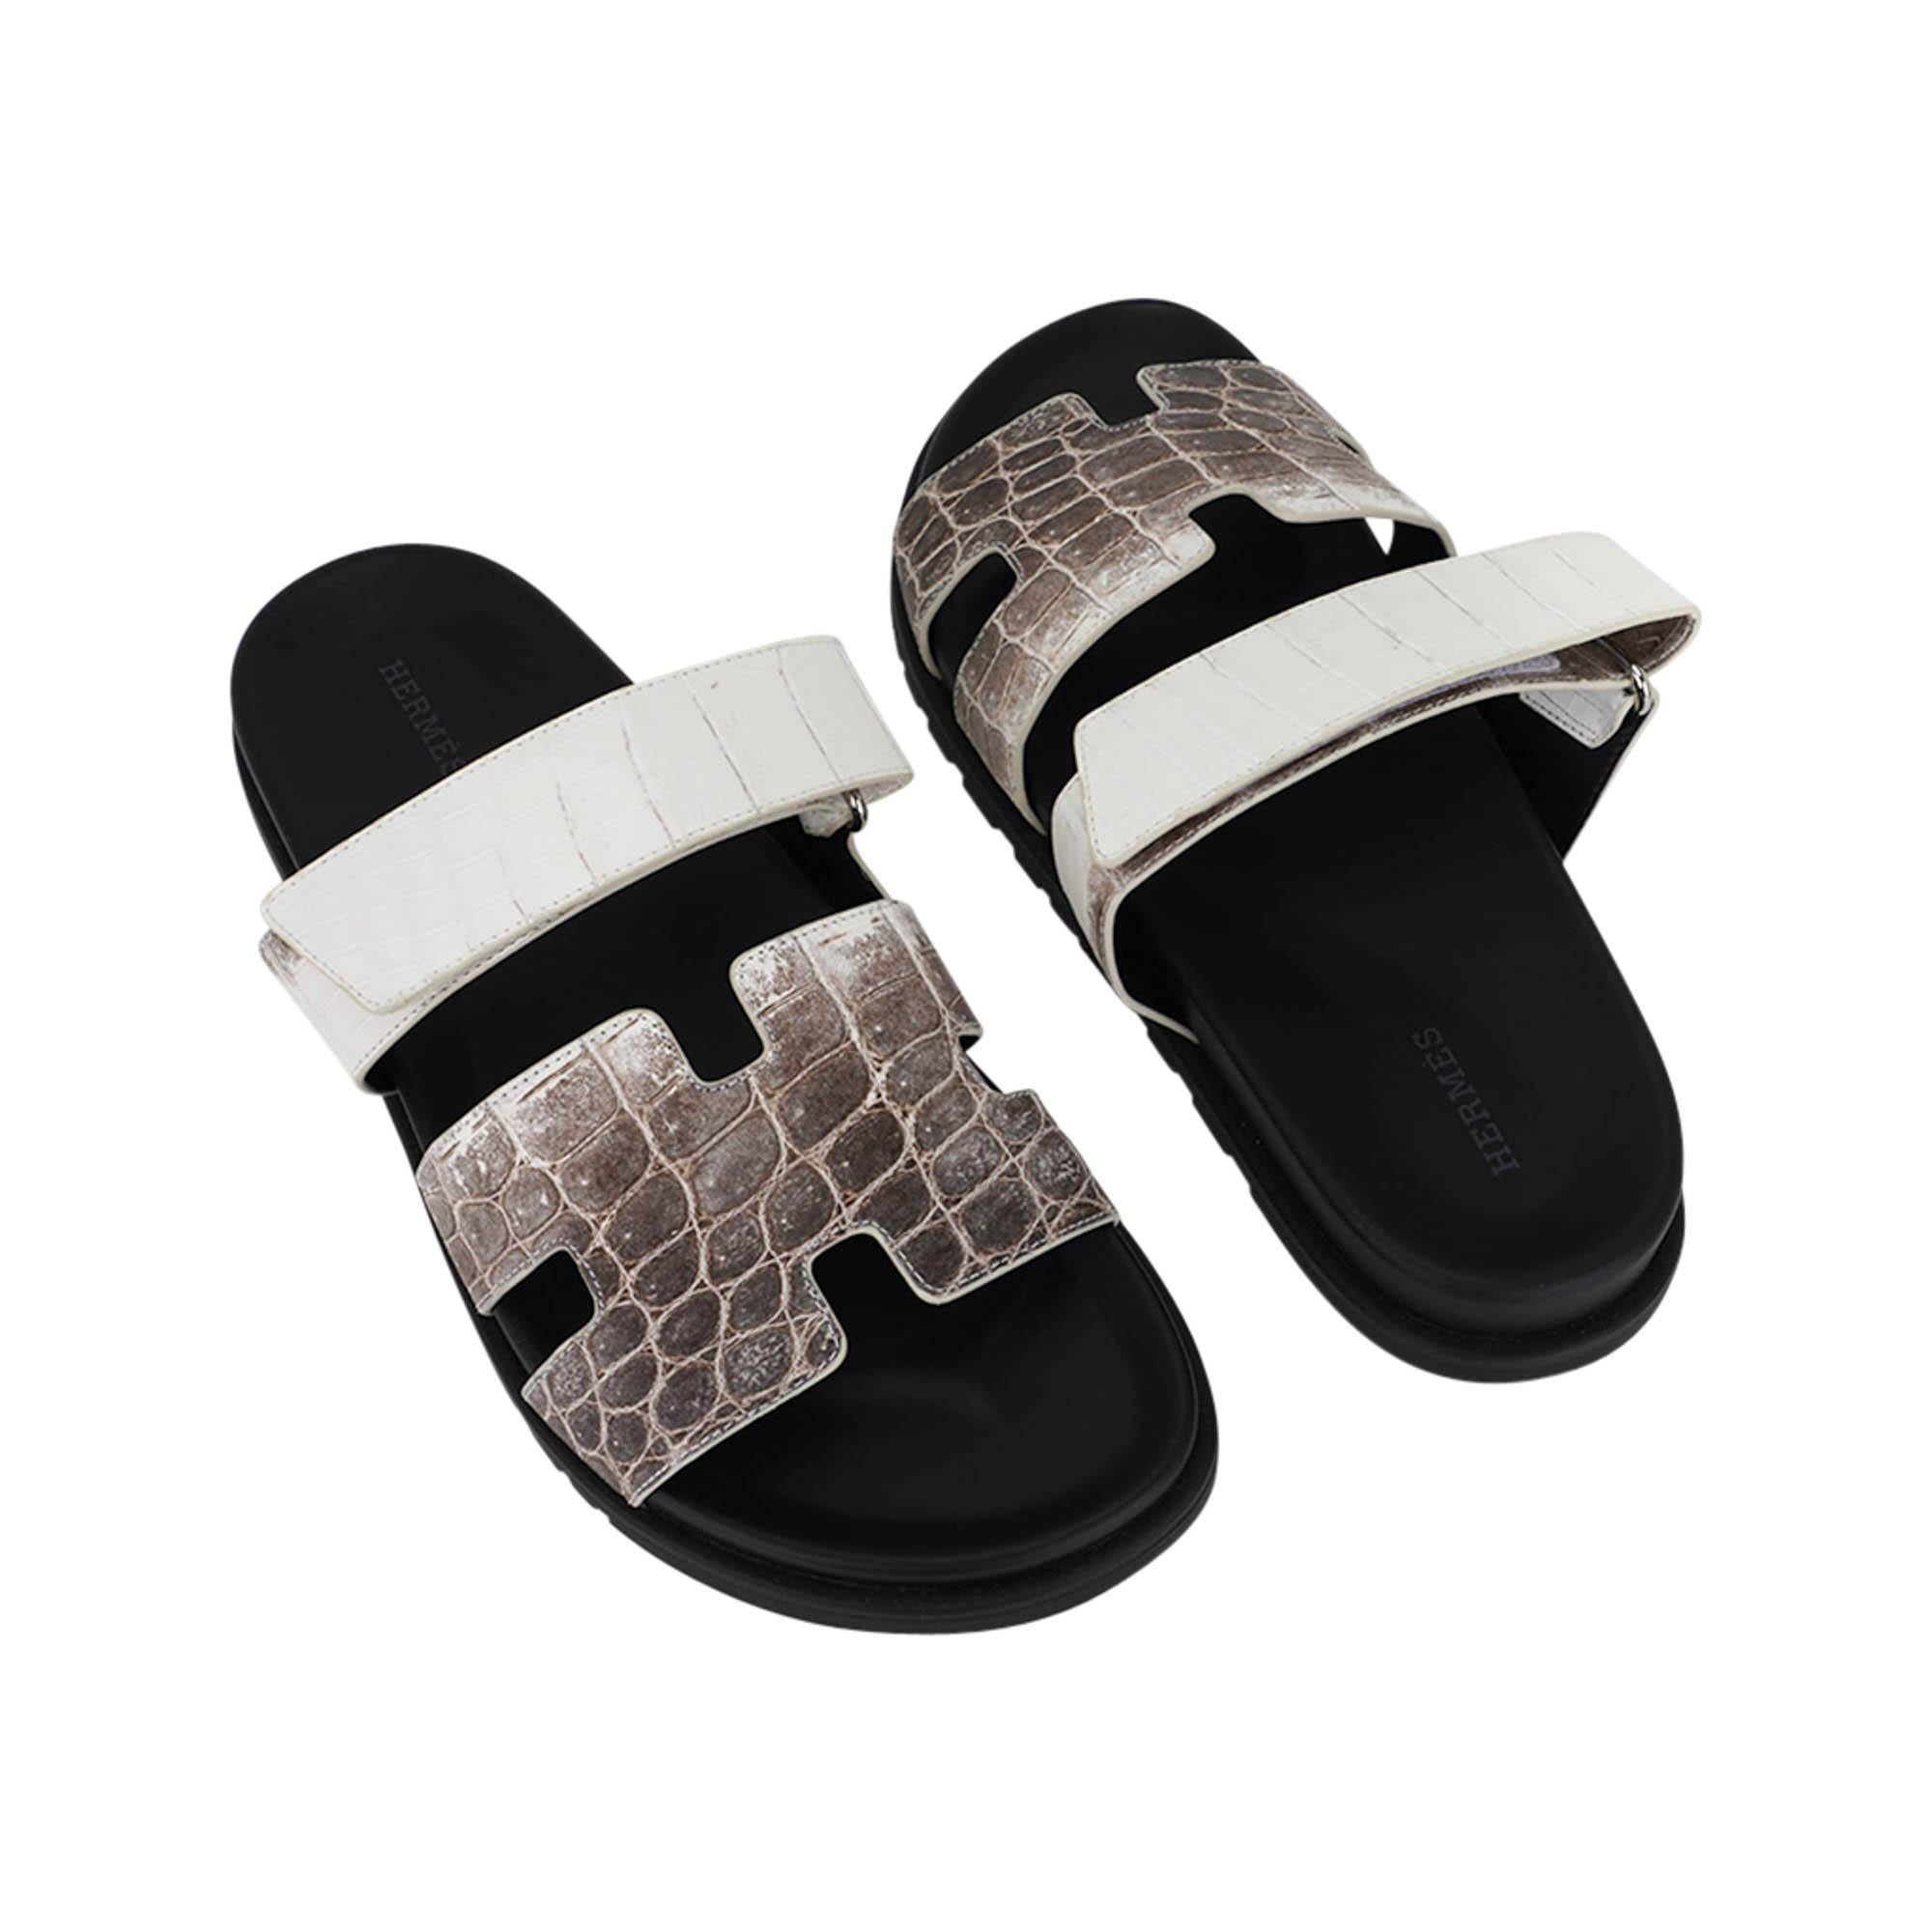 Mightychic offers a limited edition Hermes Chypre Men's sandal featured in Himalaya crocodile.
Exquisite Himalaya with black anatomical insole and H embossed black rubber sole.
Strap across foot is adjustable with velcro closure.
A testament to